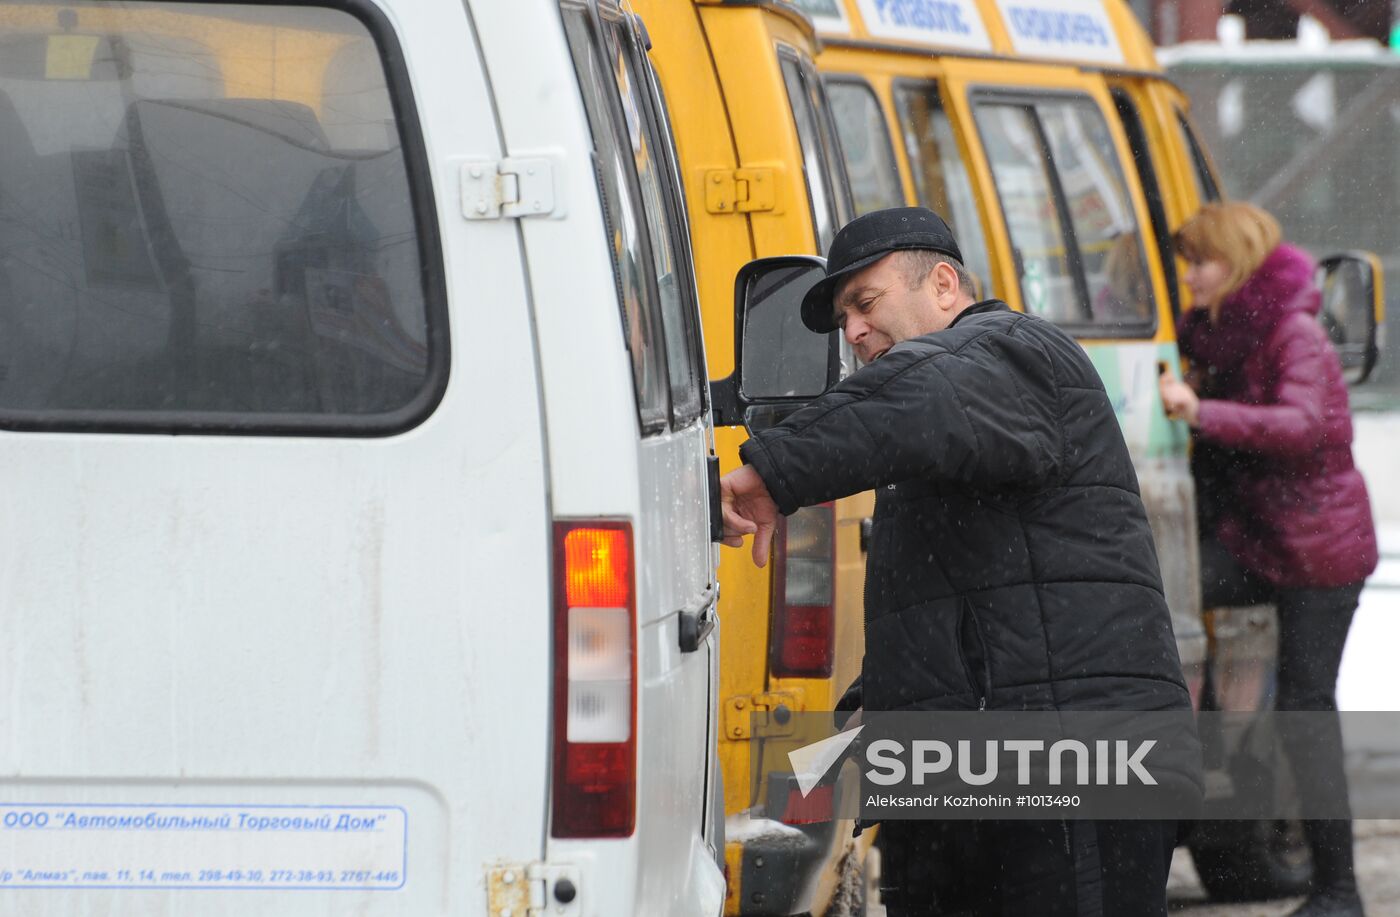 Taxi vans at work in Moscow